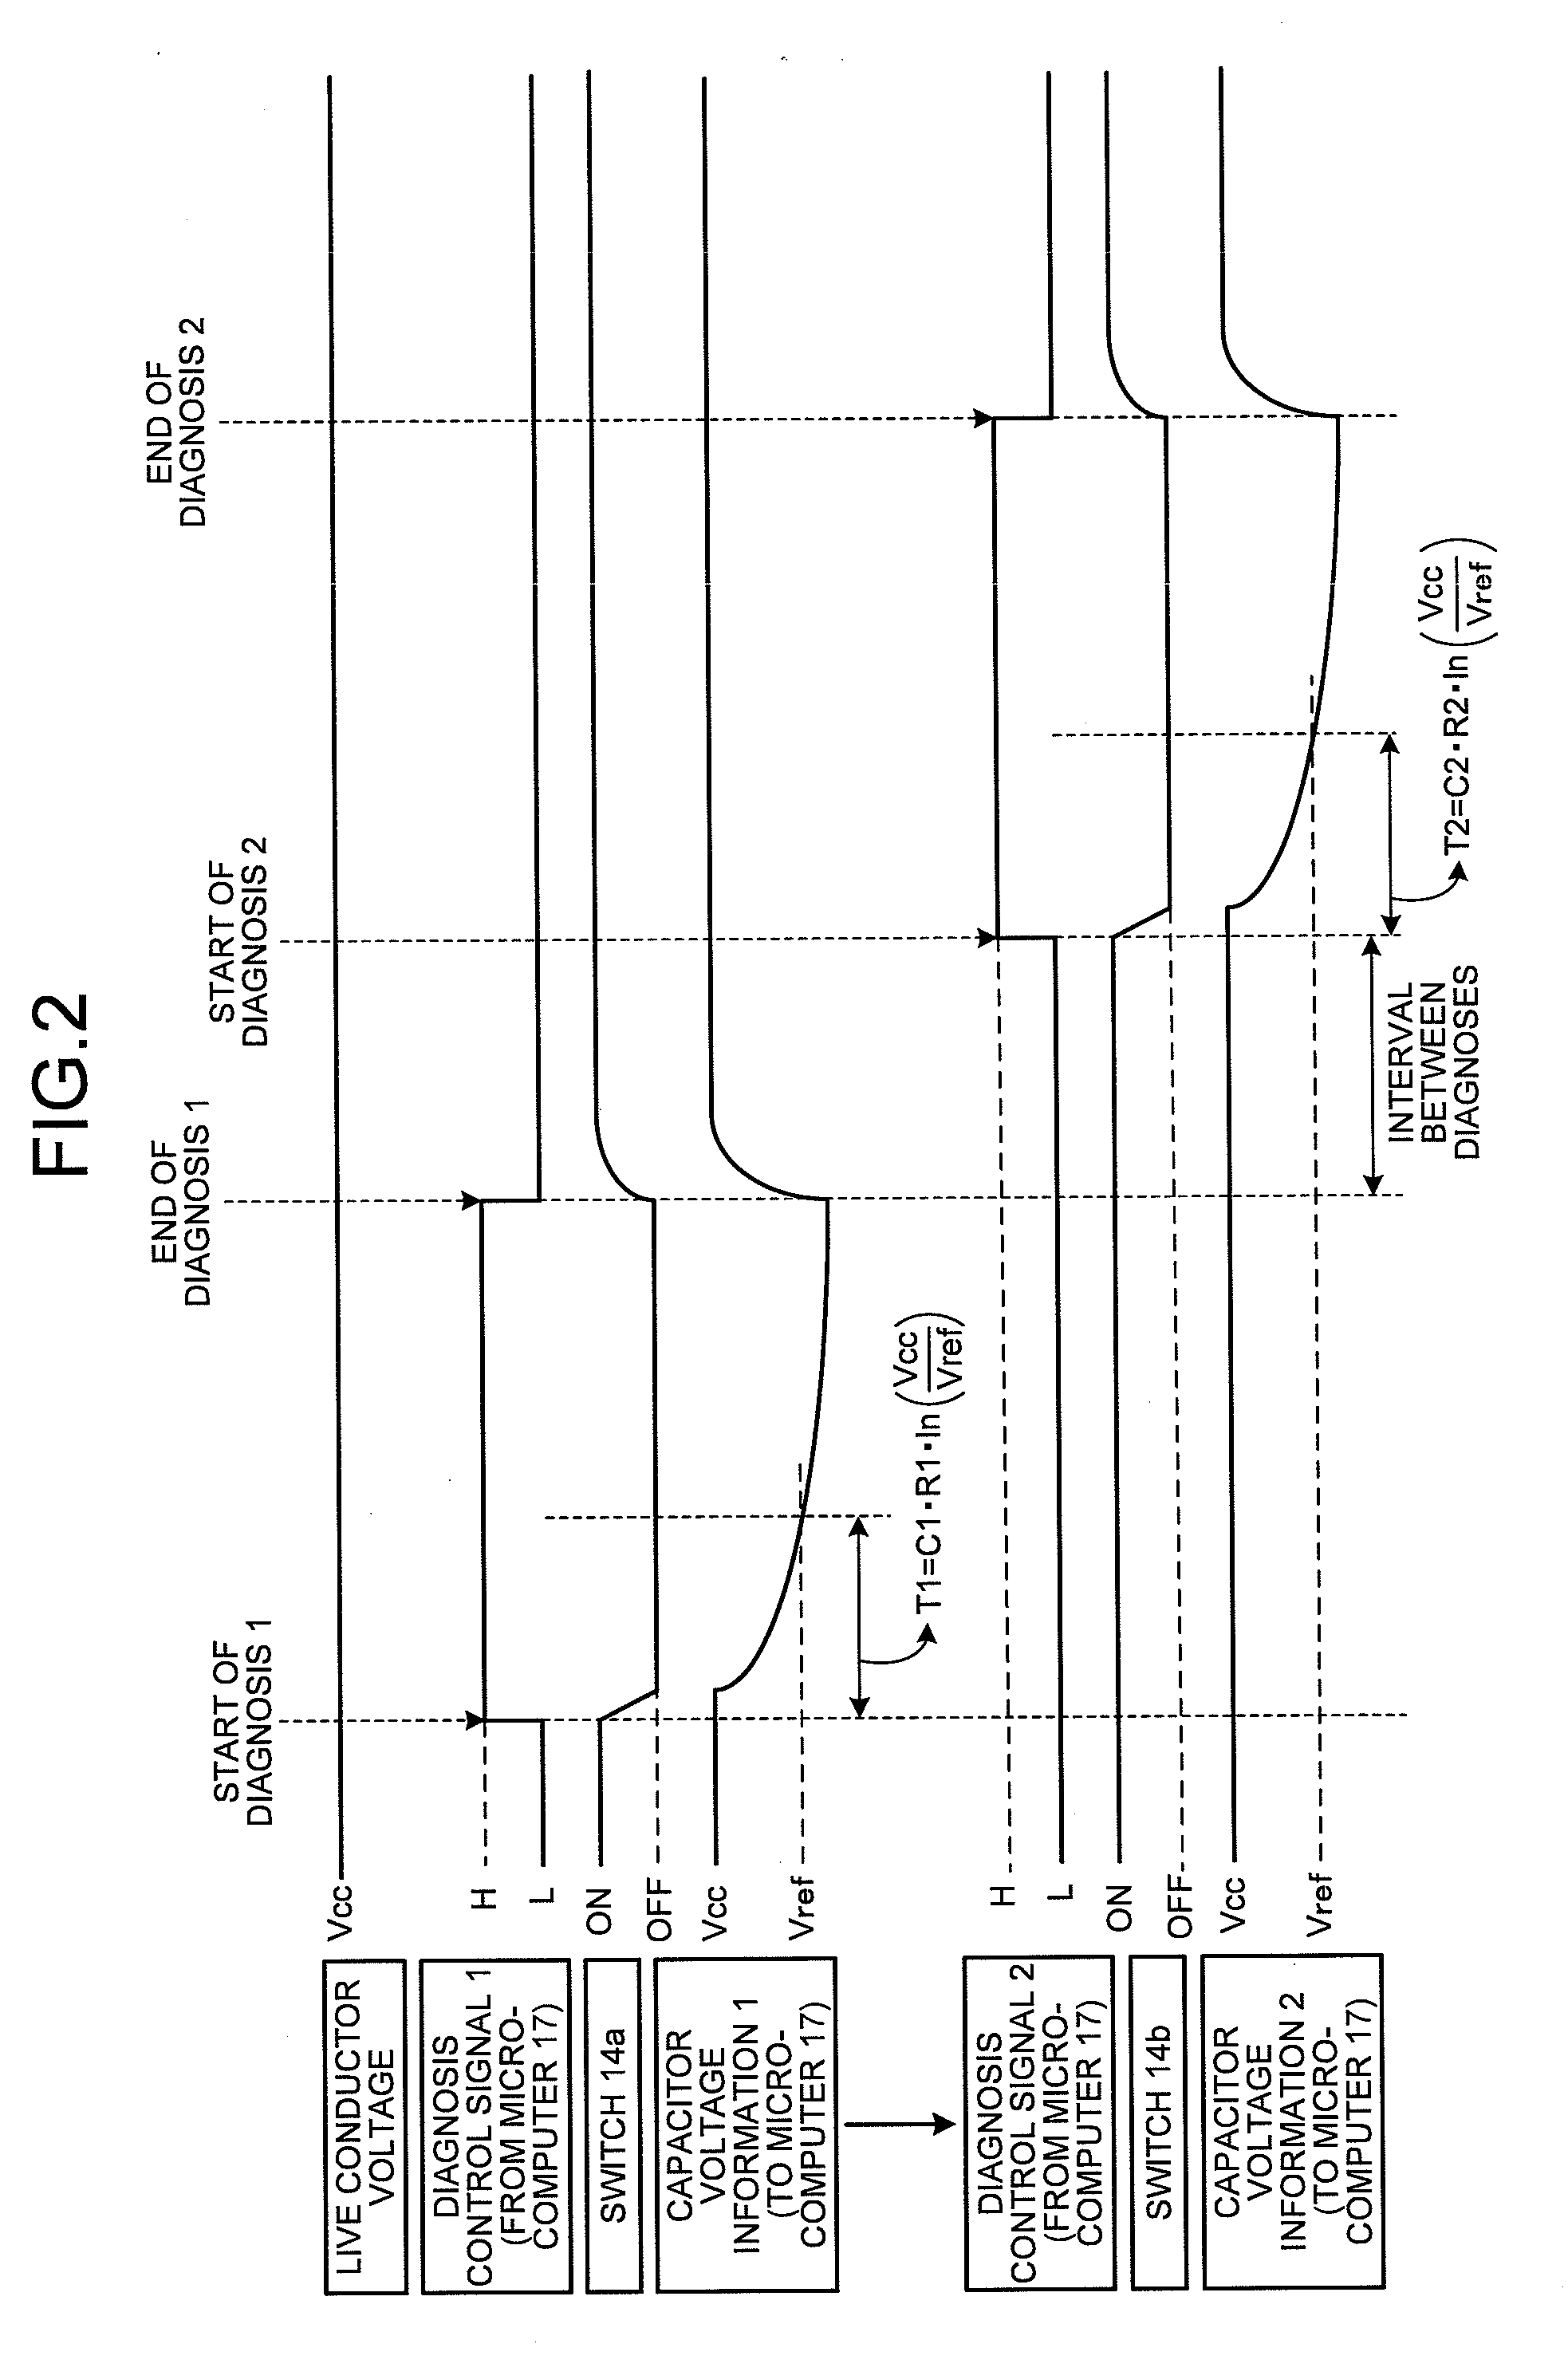 Power supply device and sequencer system